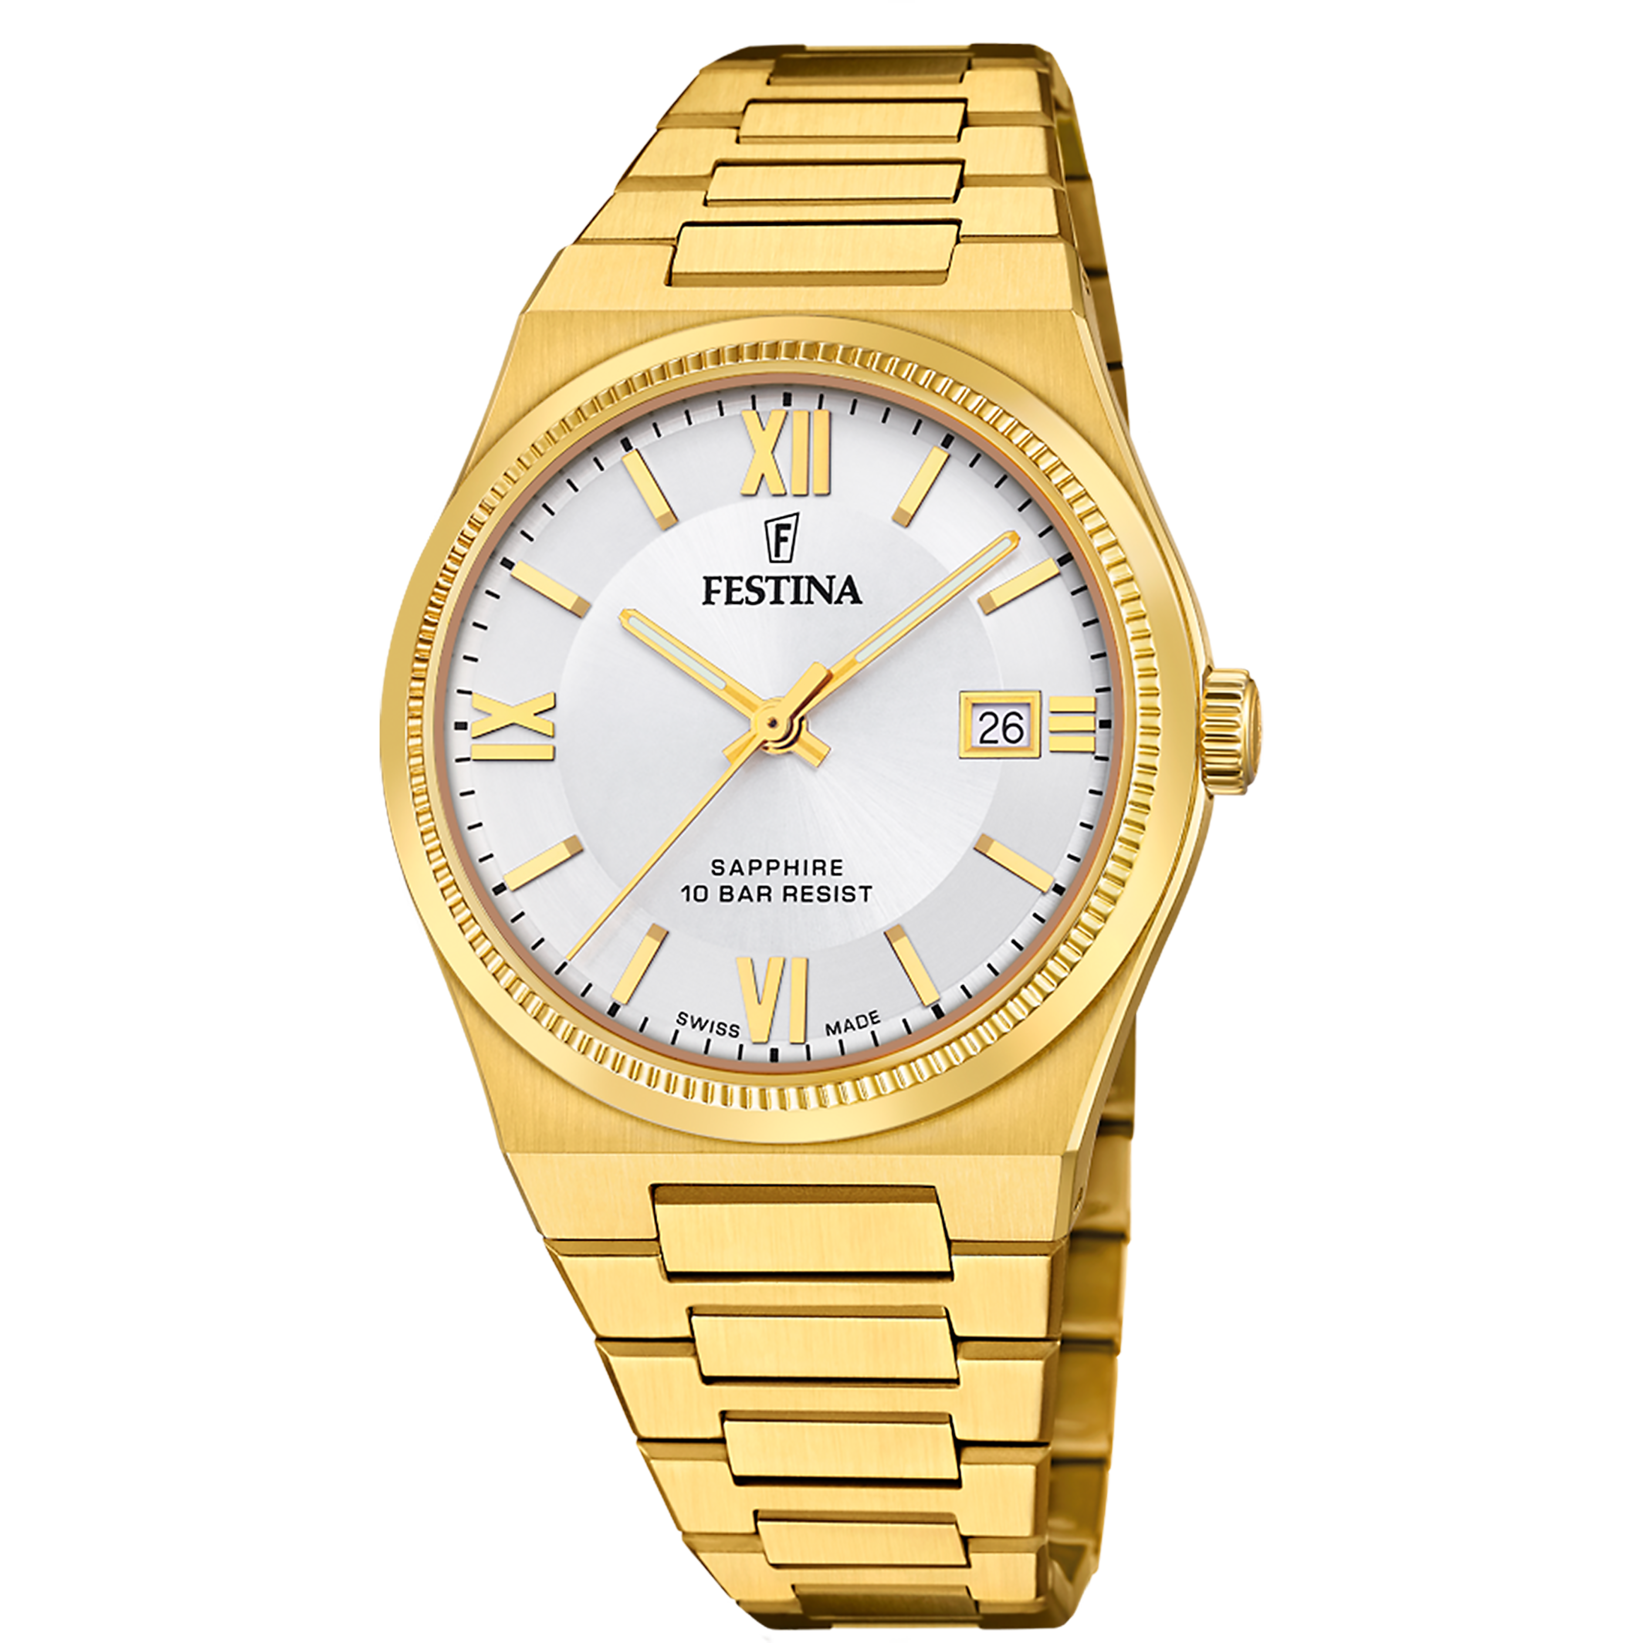 Festina Swiss Made F20038-1 - Analog - Strap Material Stainless Steel I Festina Watches USA